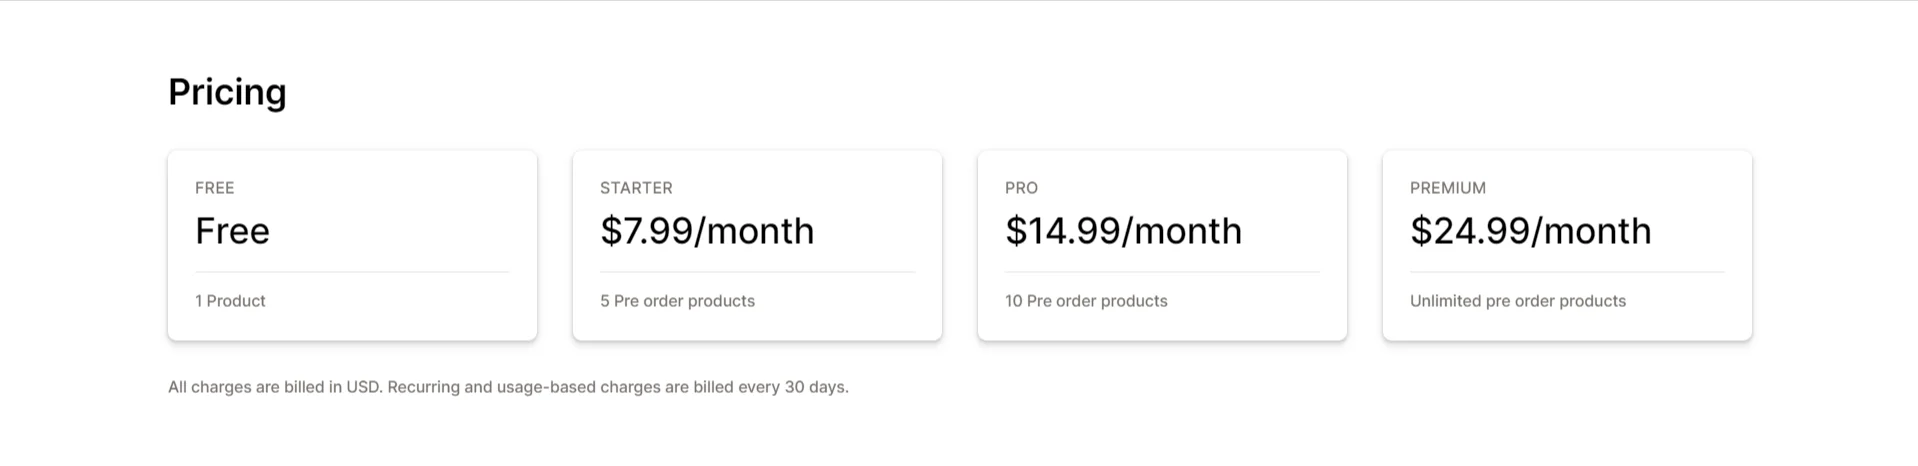 Pre Oder Today Pricing Plan - Shopify Pre Order Apps